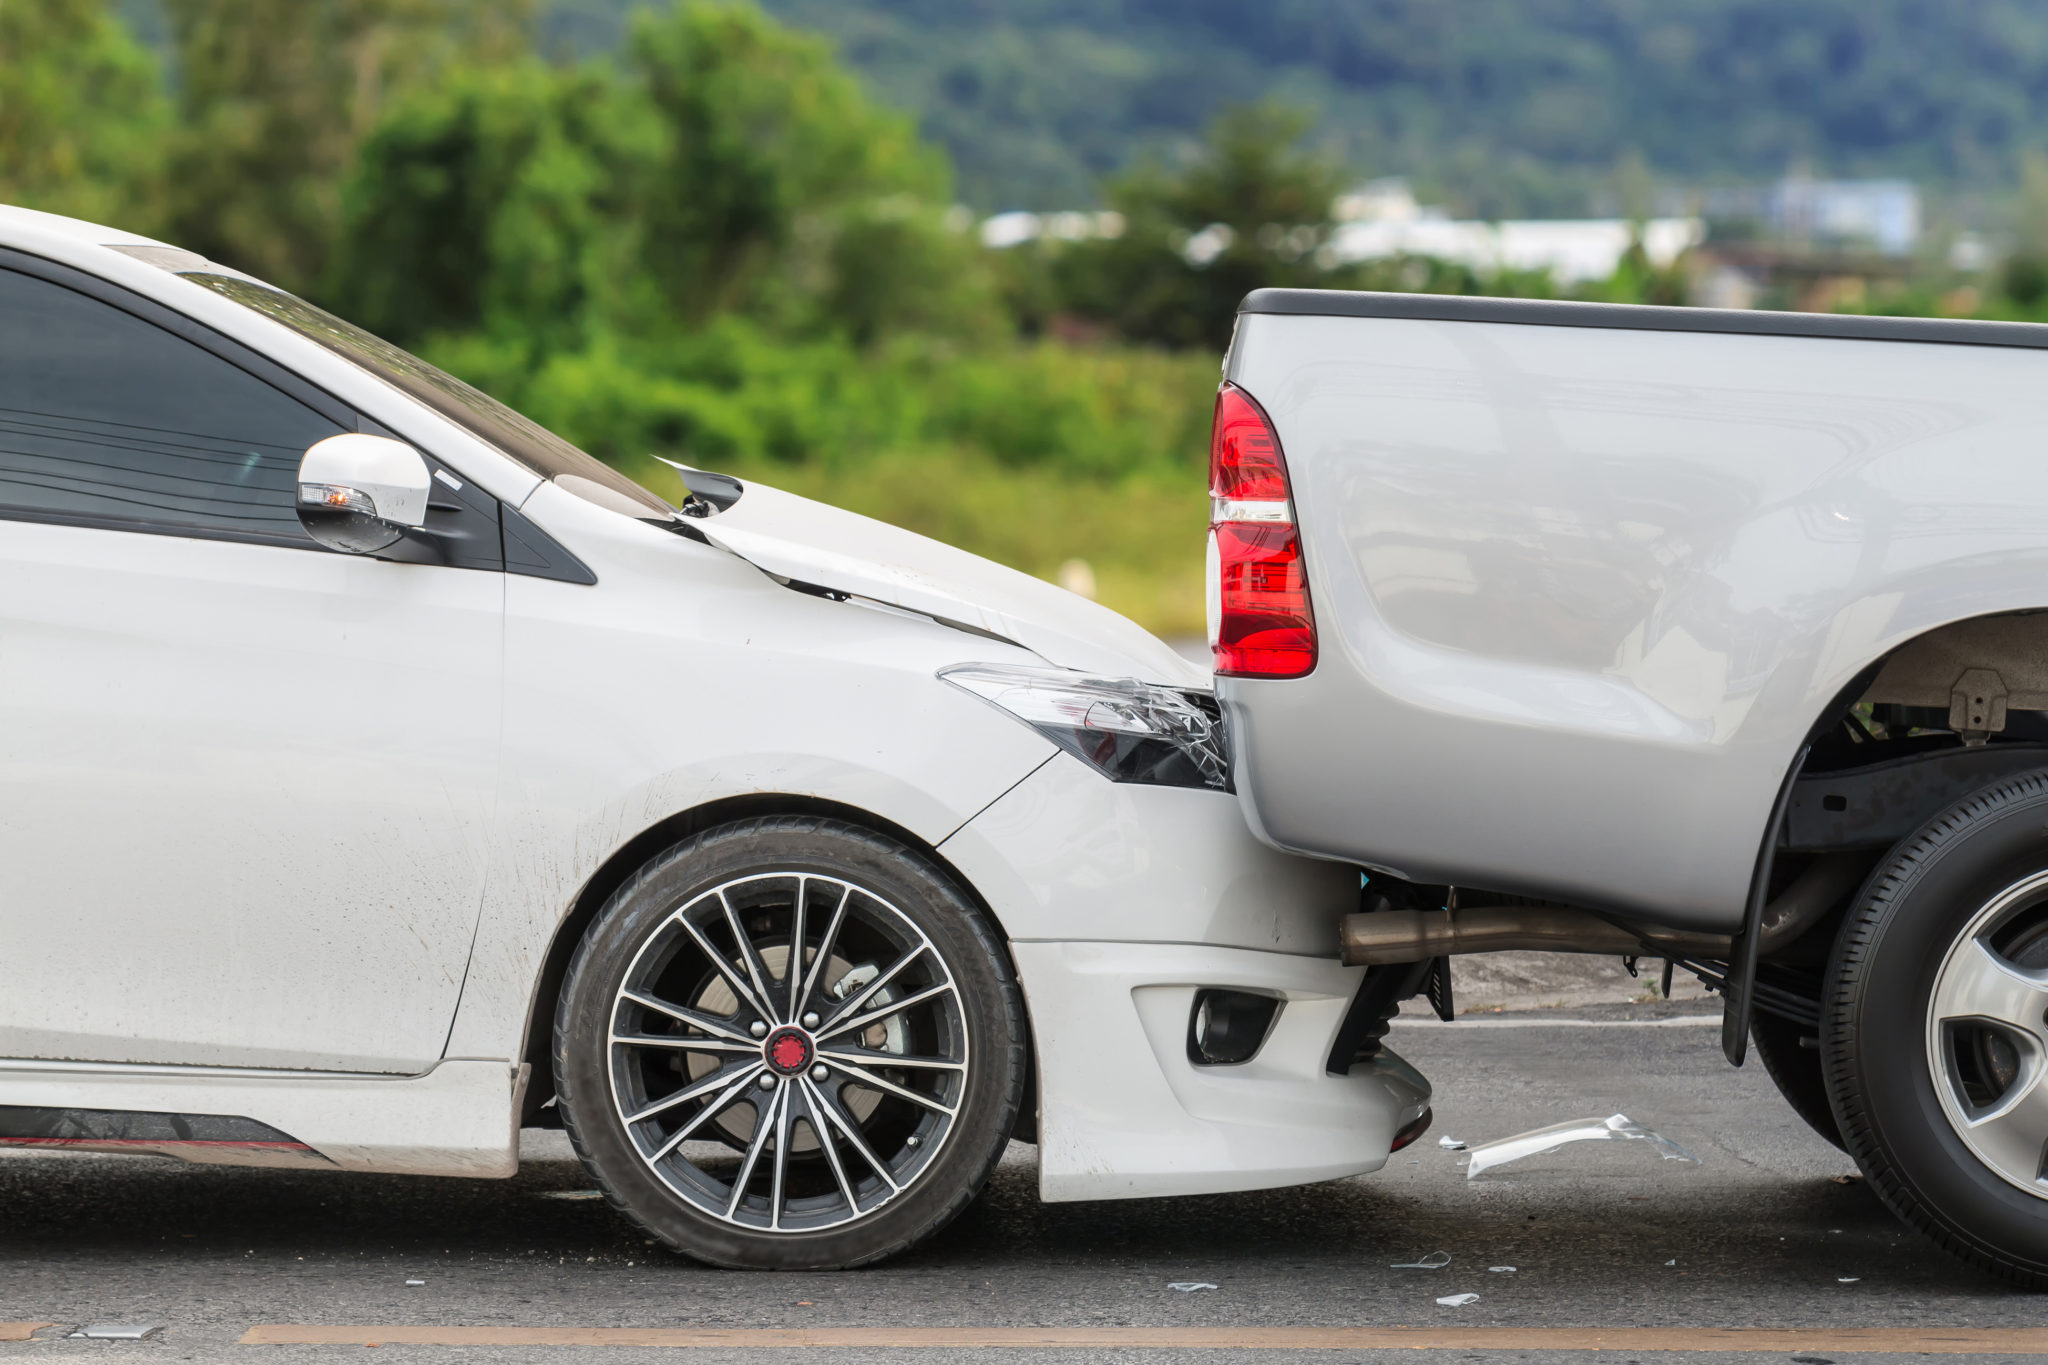 How Much Can I Get From a Rear-End Collision in Ohio?